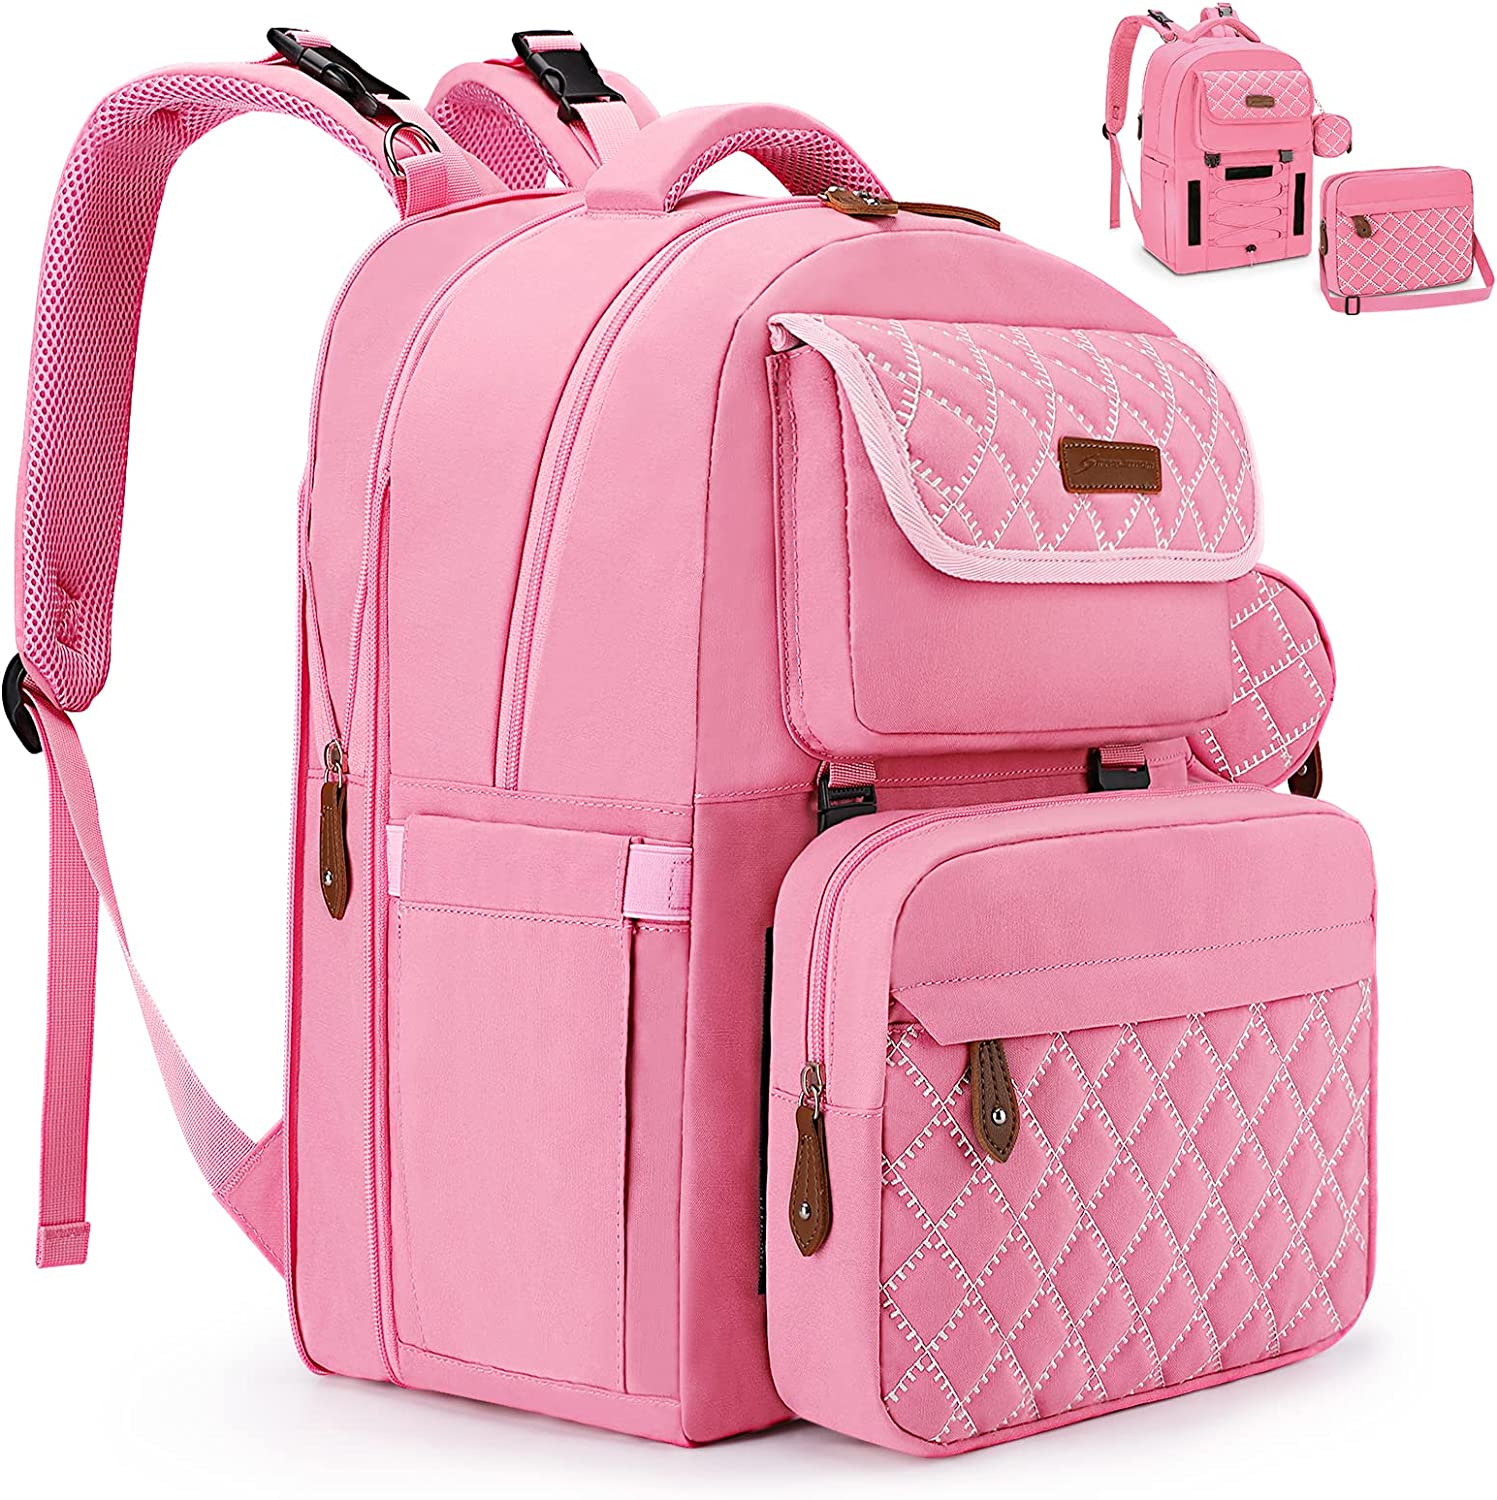 Maelstrom Diaper Bag Backpack - Expandable Large Baby Bag for 2 Kids /Twins Baby Stuff (45L MAX), with Removable Cross Body Bottle Bag for Mom/Dad,Stylish Nappy Bag Gift for Boys/Girl-Pink
